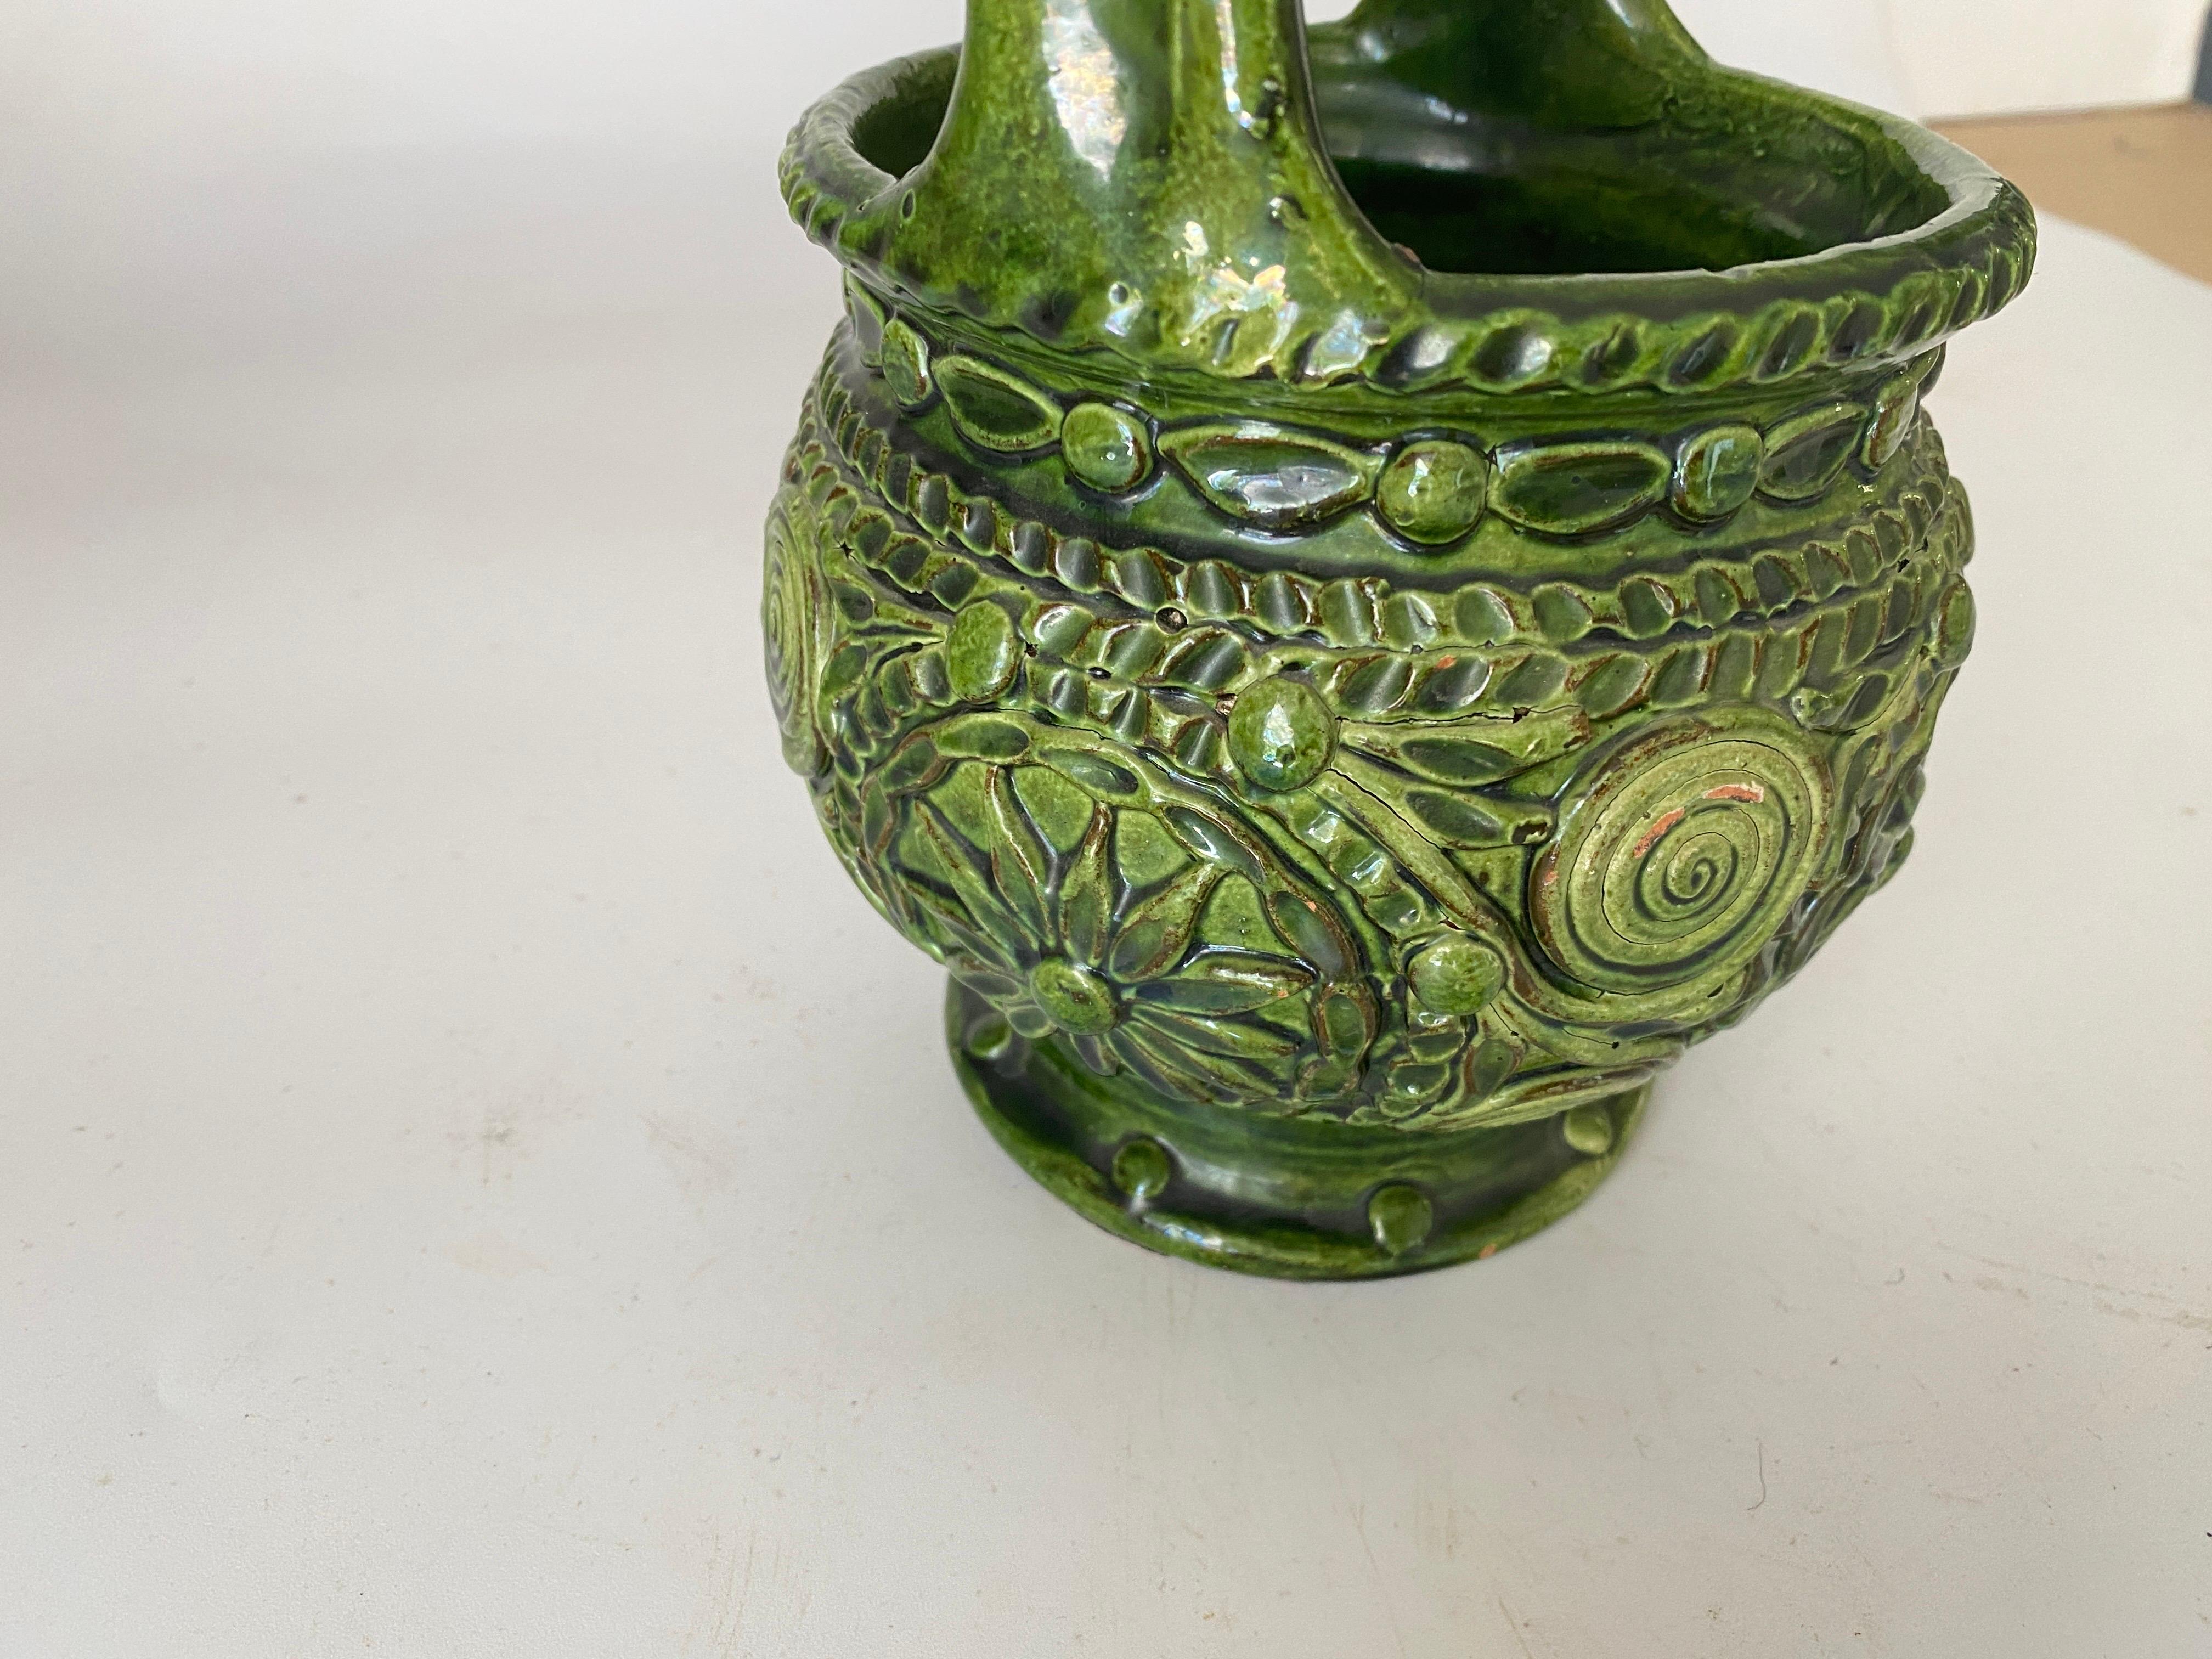  Pot or Box 19th Century Majolica France Ceramic Green with an Circular Handle In Good Condition For Sale In Auribeau sur Siagne, FR